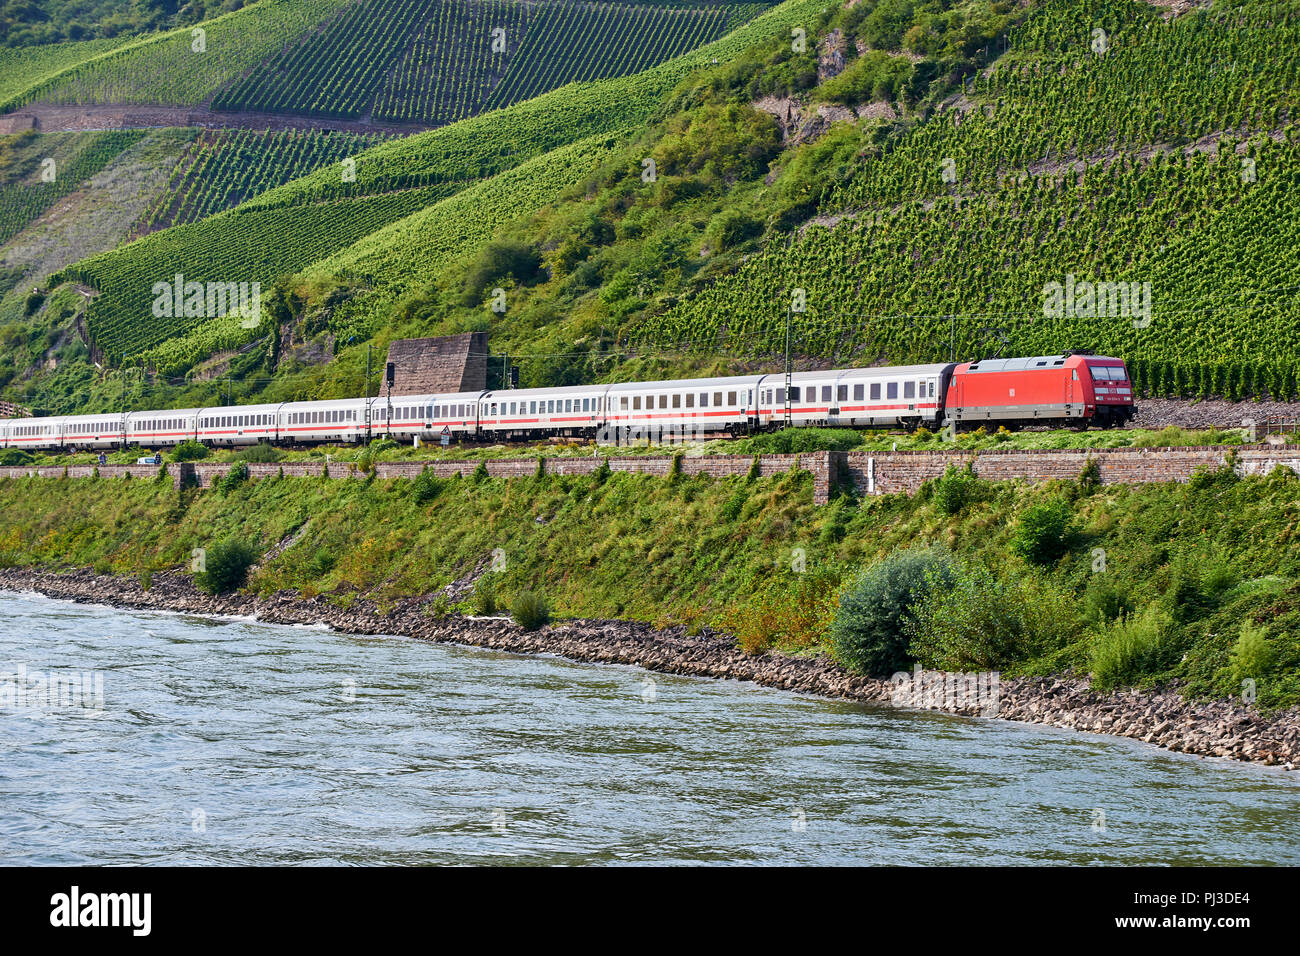 Passenger train pulled by DB 101 class electric locomotive along the Rhine river towards Spay, opposite Osterpai, with vineyards in the background Stock Photo